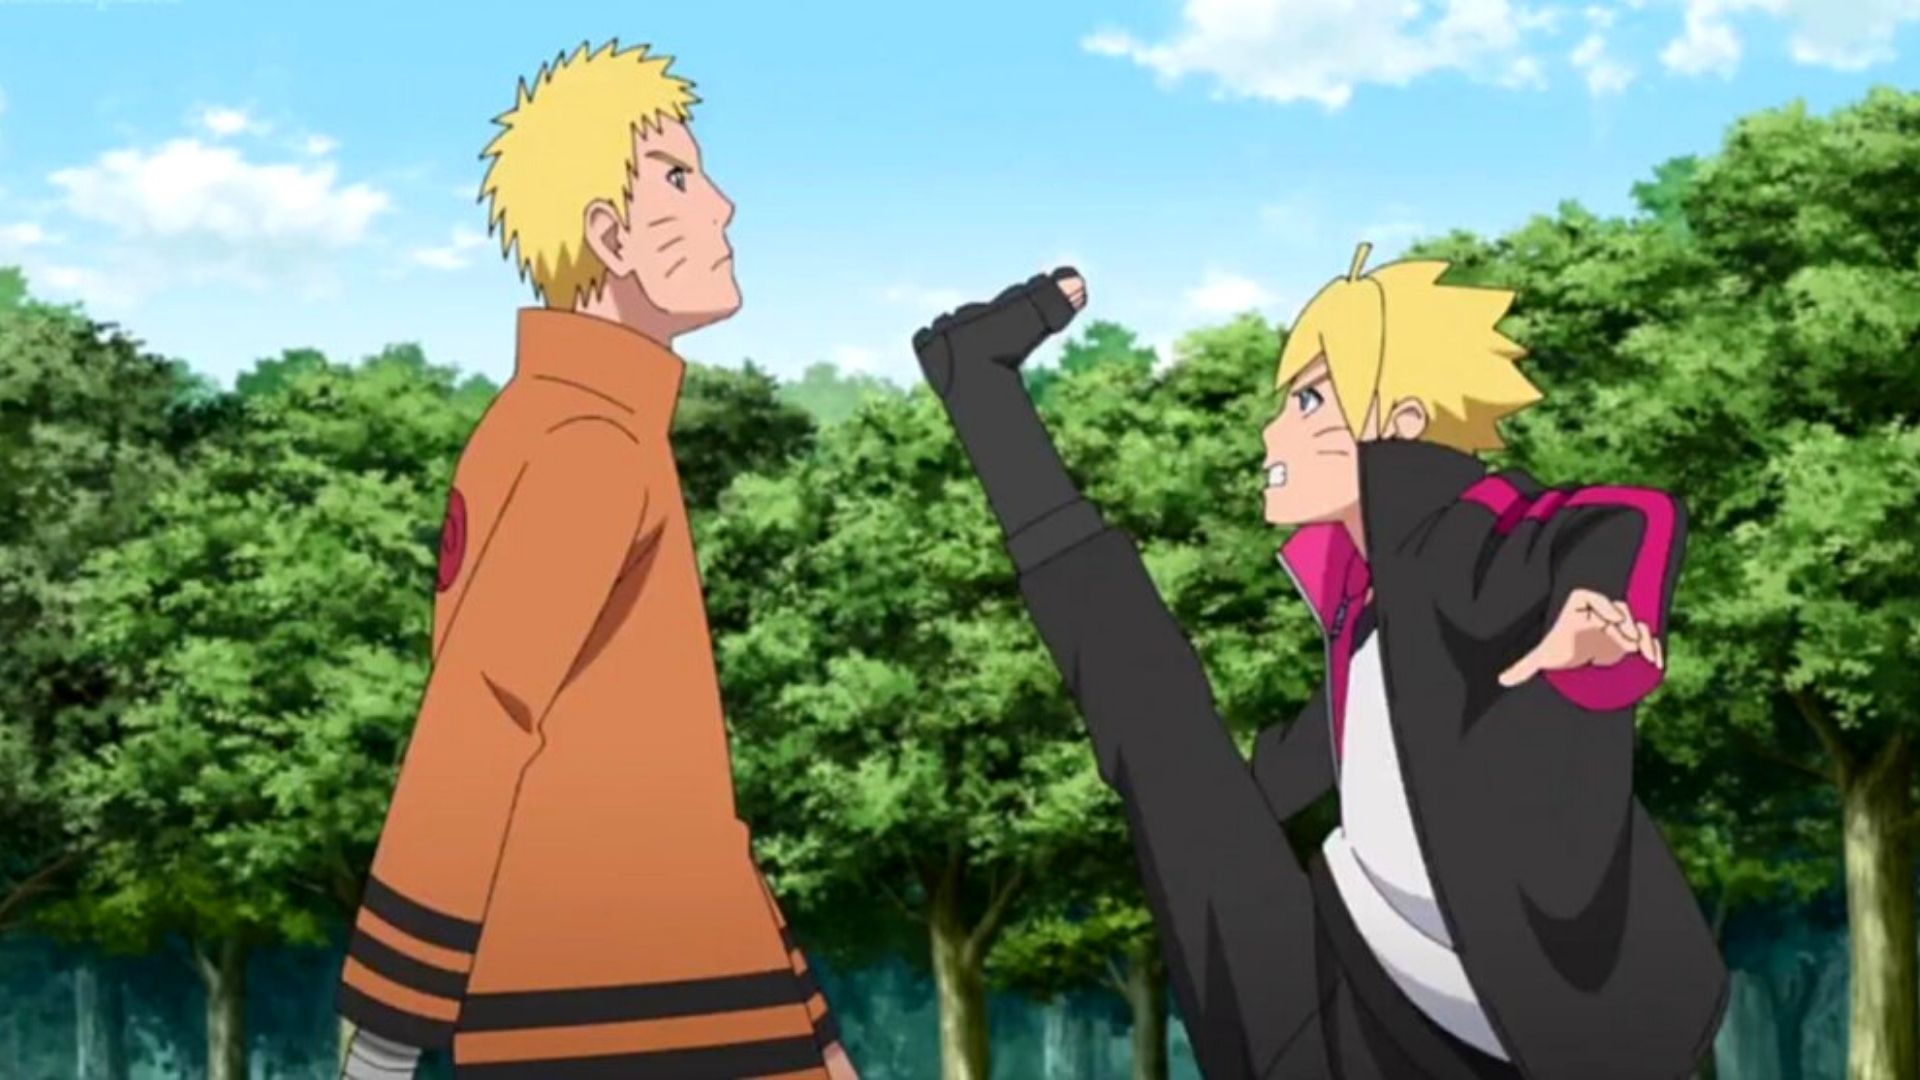 Is Boruto episode 294 releasing this weekend after time skip tease?